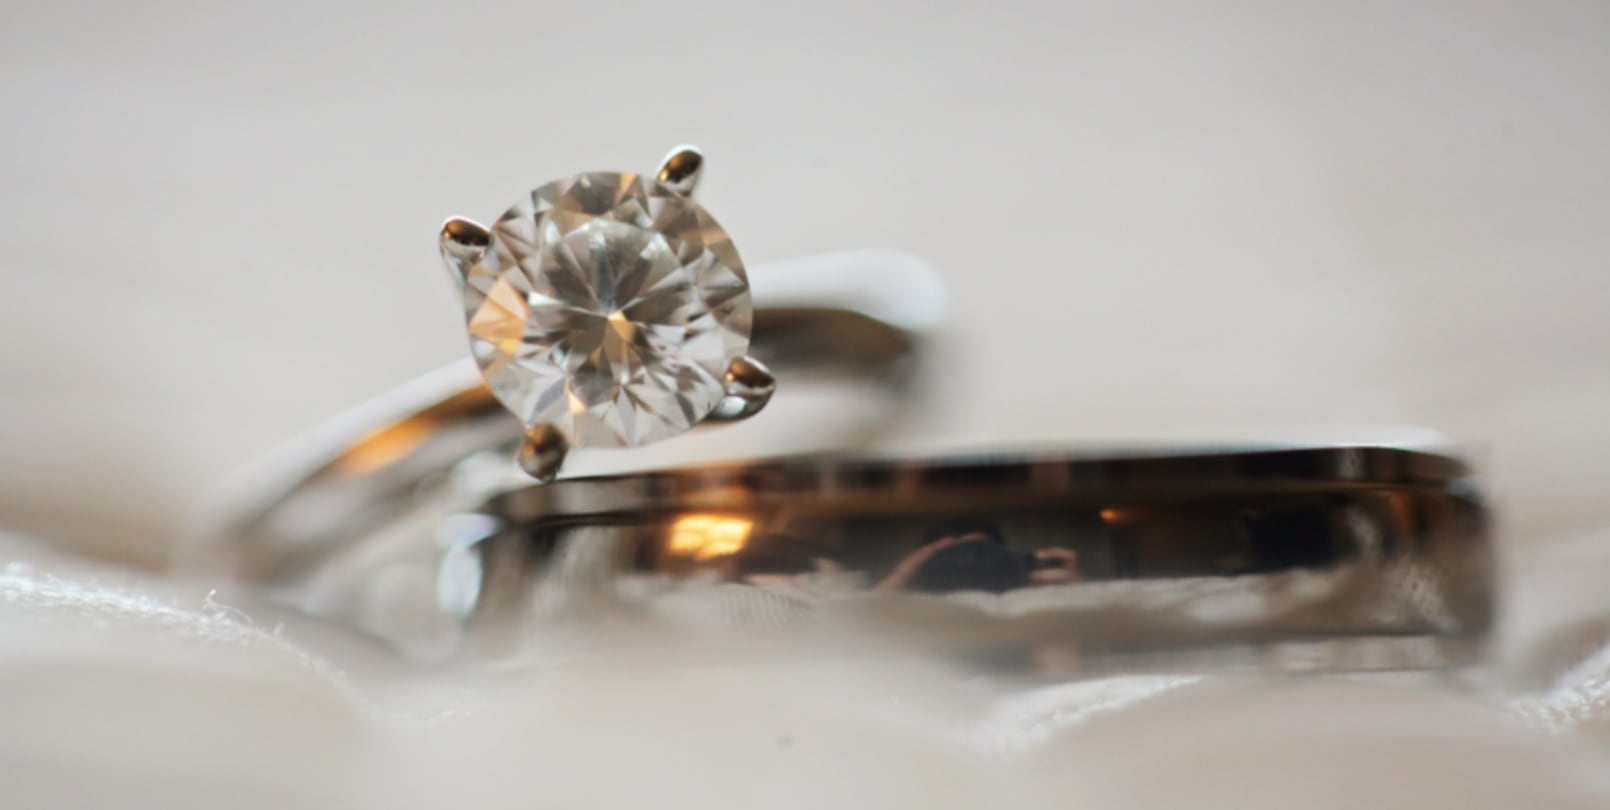 does insurance cover a diamond falling out of an engagement ring?